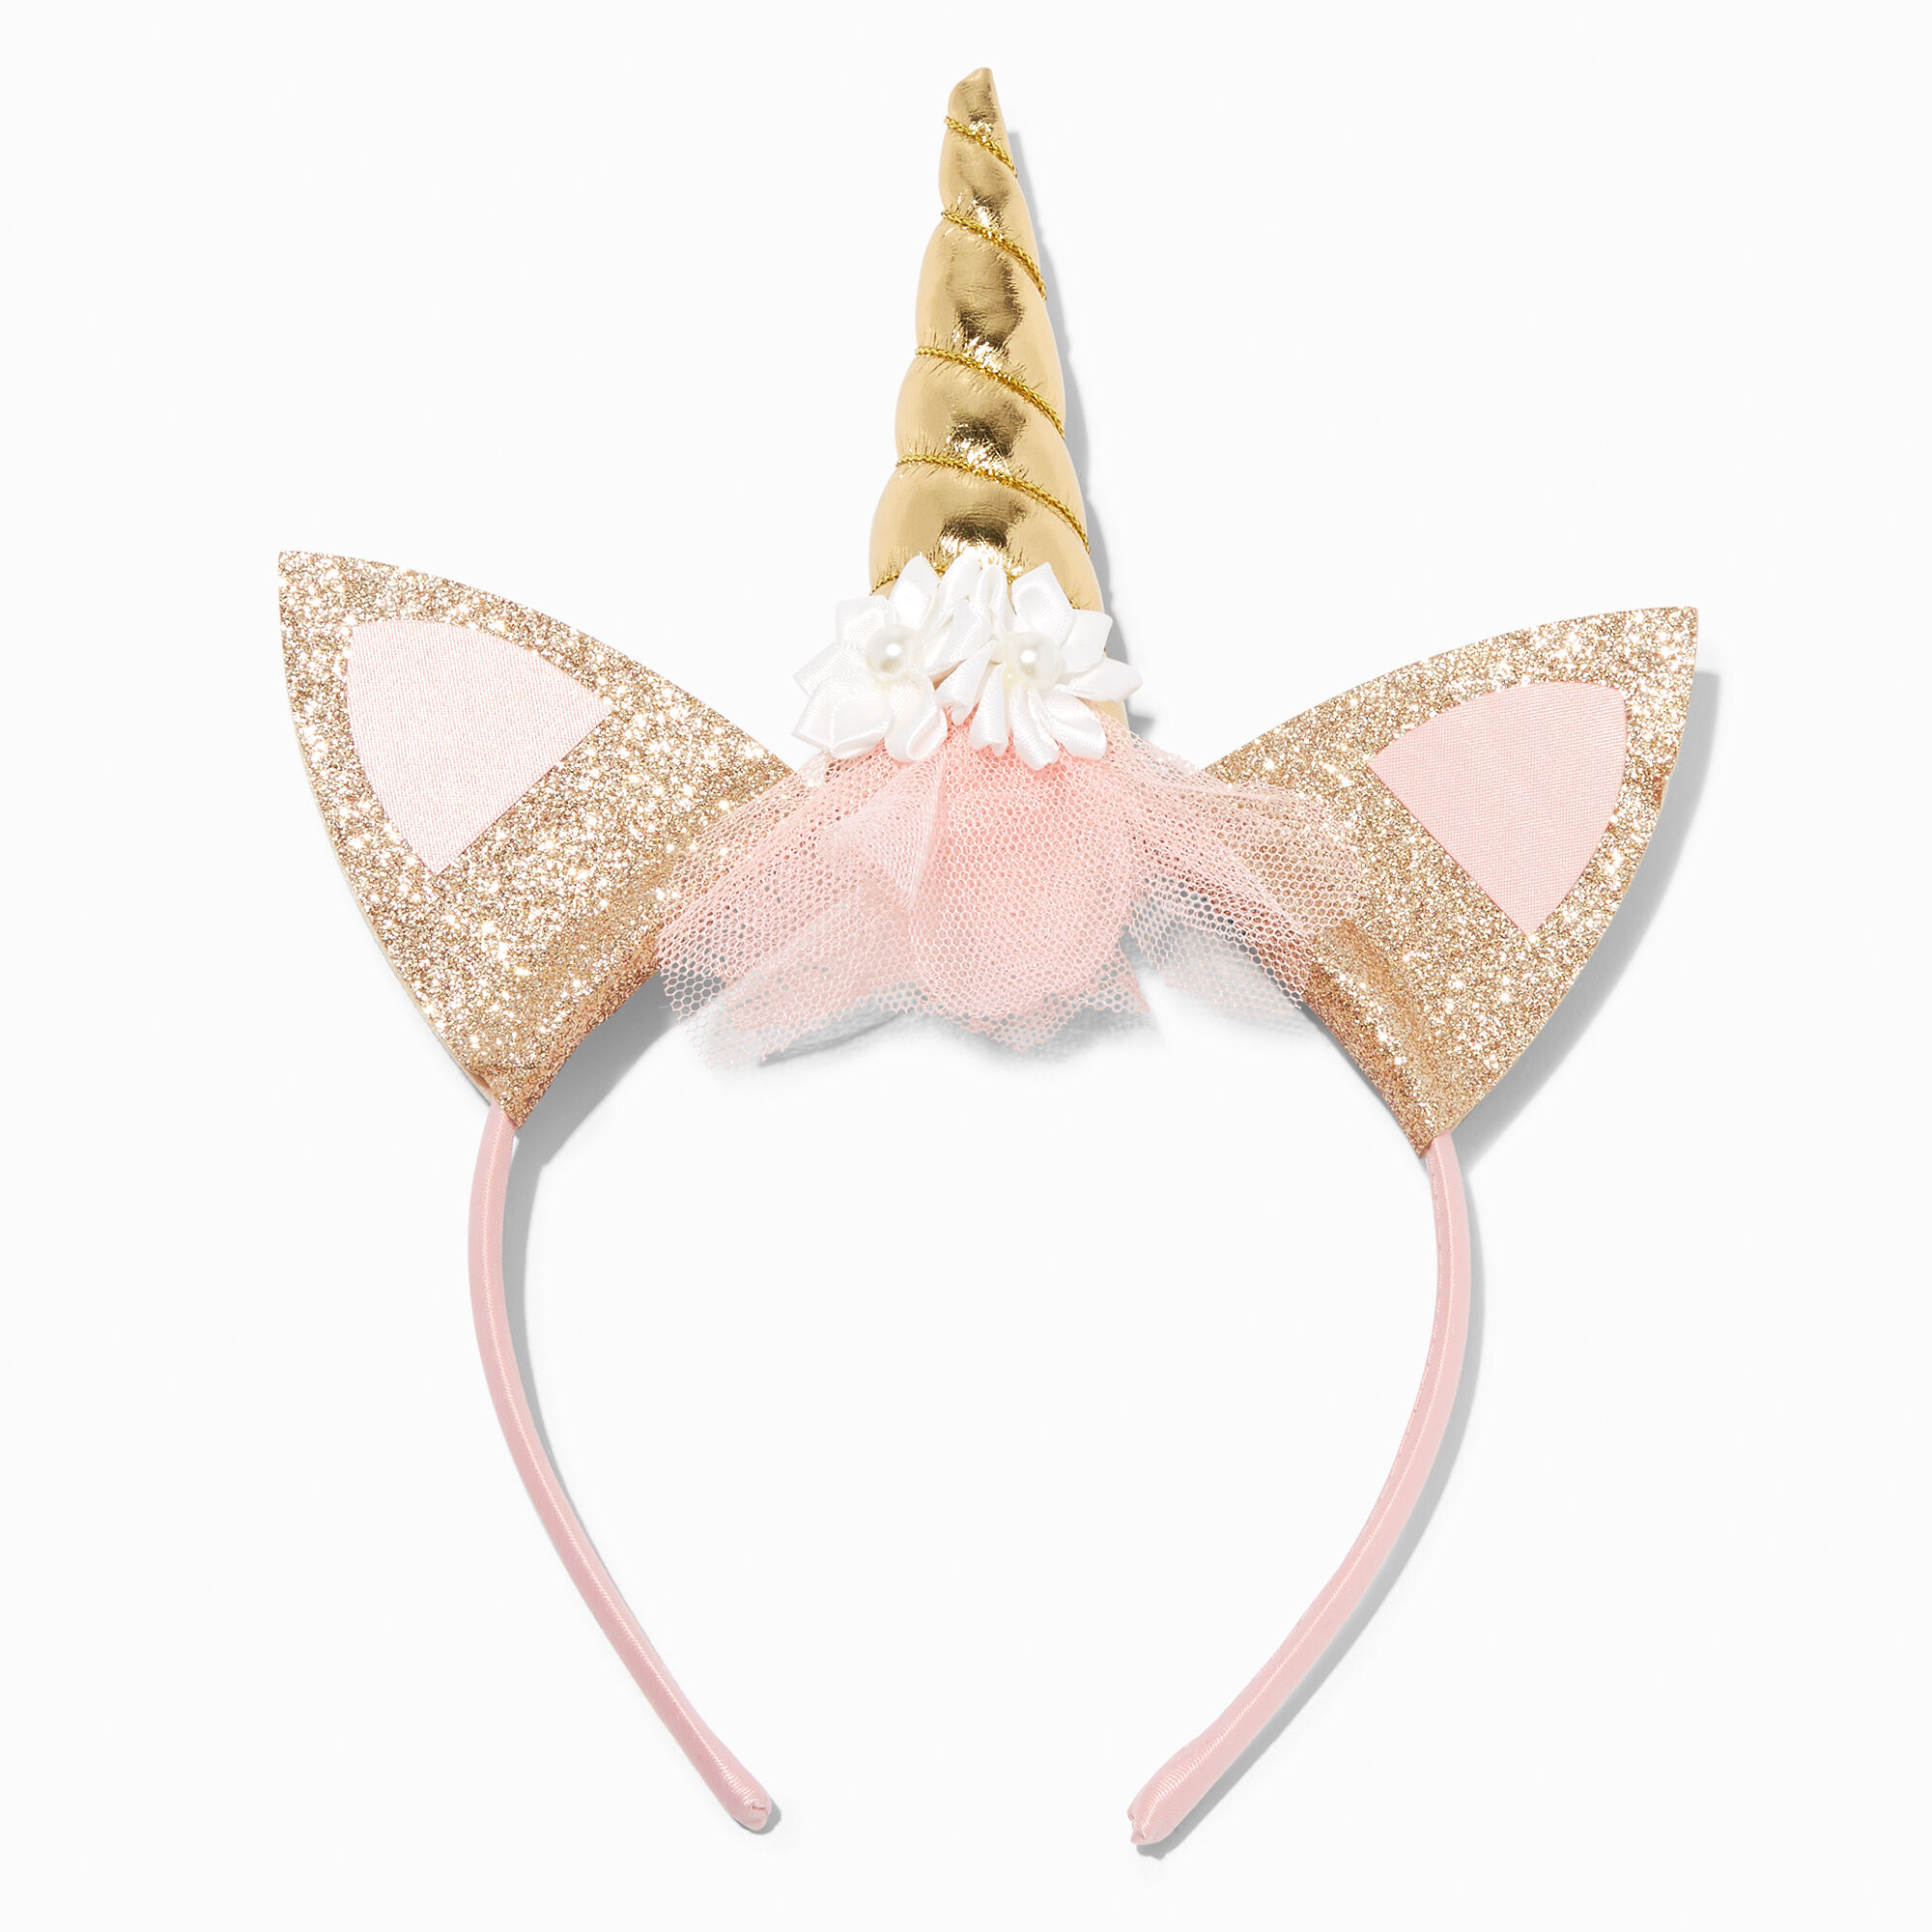 View Claires Club Gold Glitter Unicorn Ears Headband Pink information